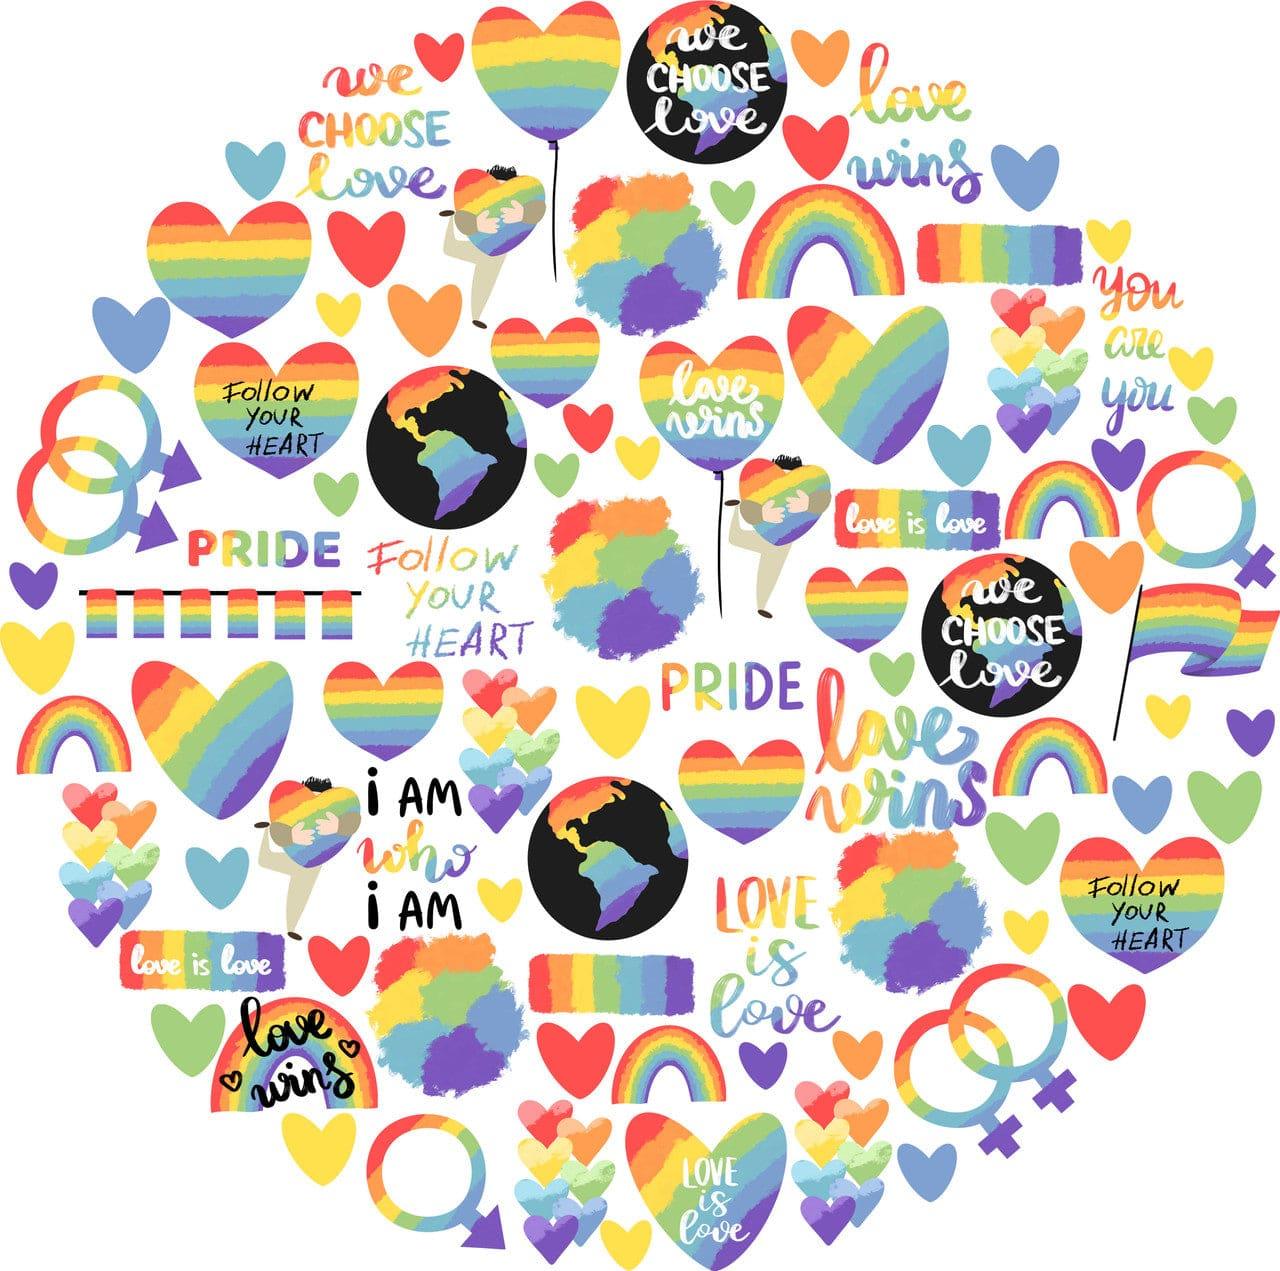 Love Wins Collection I Am Who I Am 12 x 12 Double-Sided Scrapbook Paper by SSC Designs - Scrapbook Supply Companies